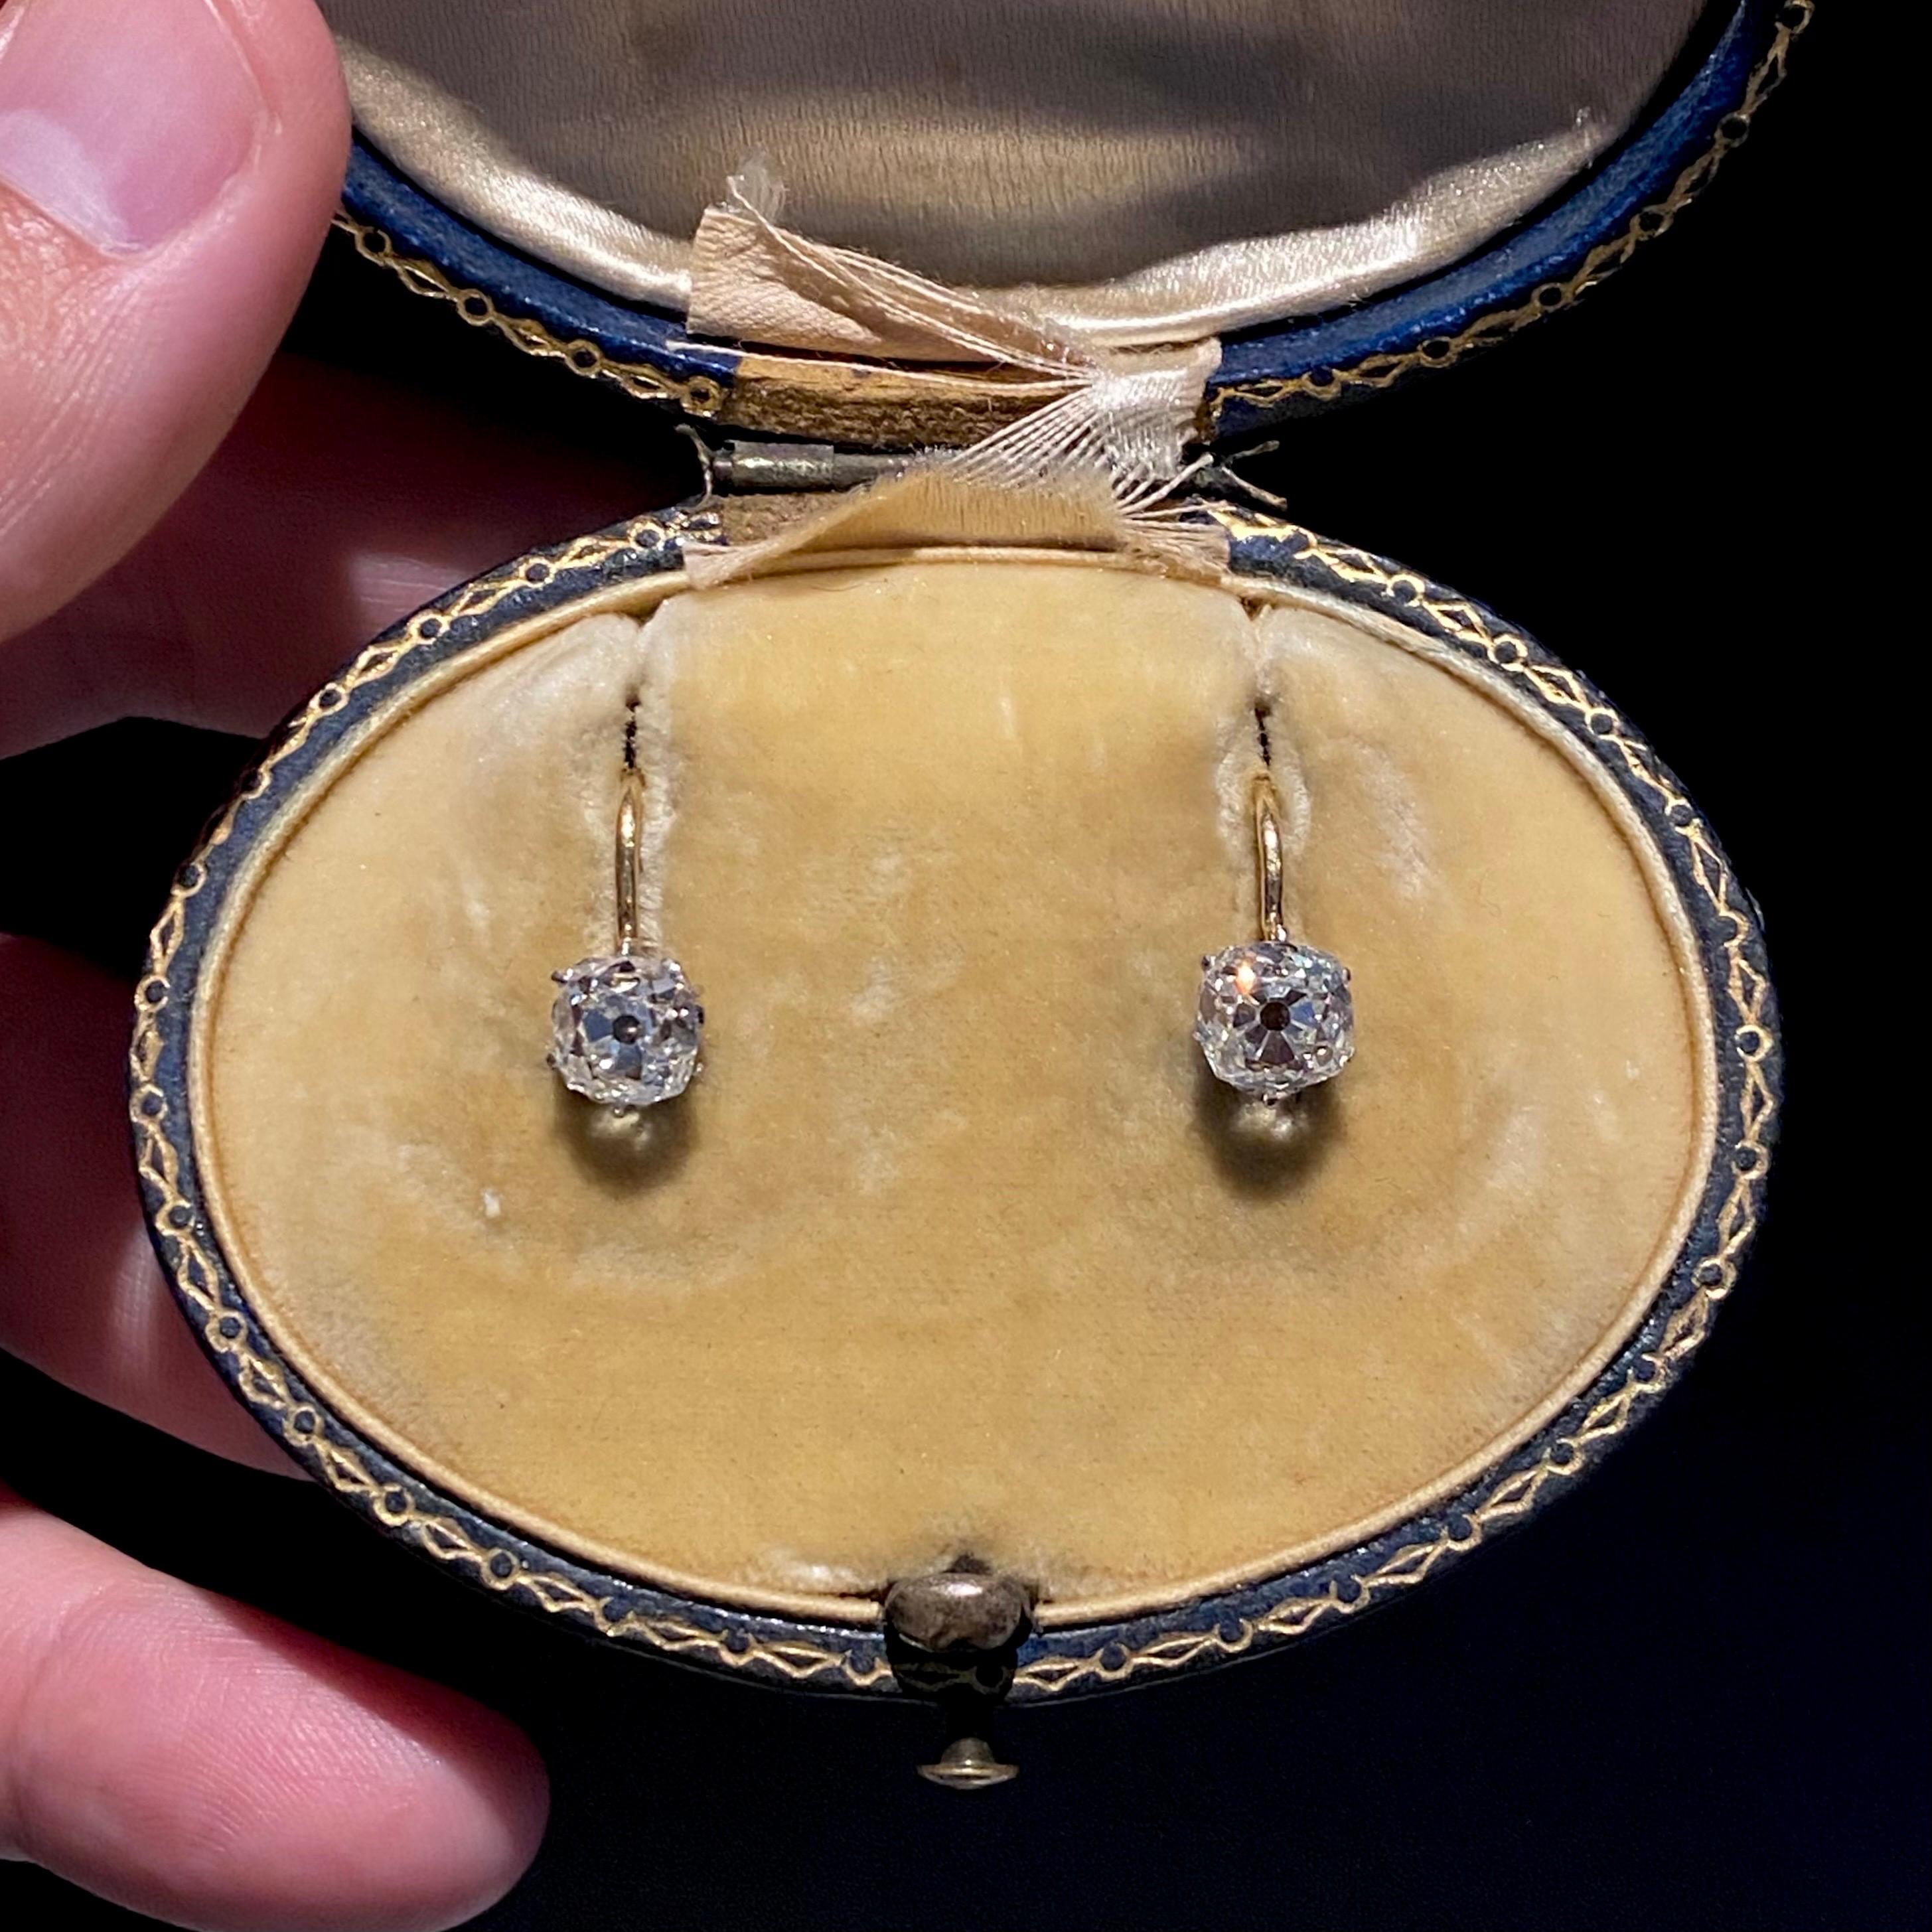 Antique Edwardian 3.4ct Old Mine Diamond Earrings Yellow Gold Portuguese Cased 1